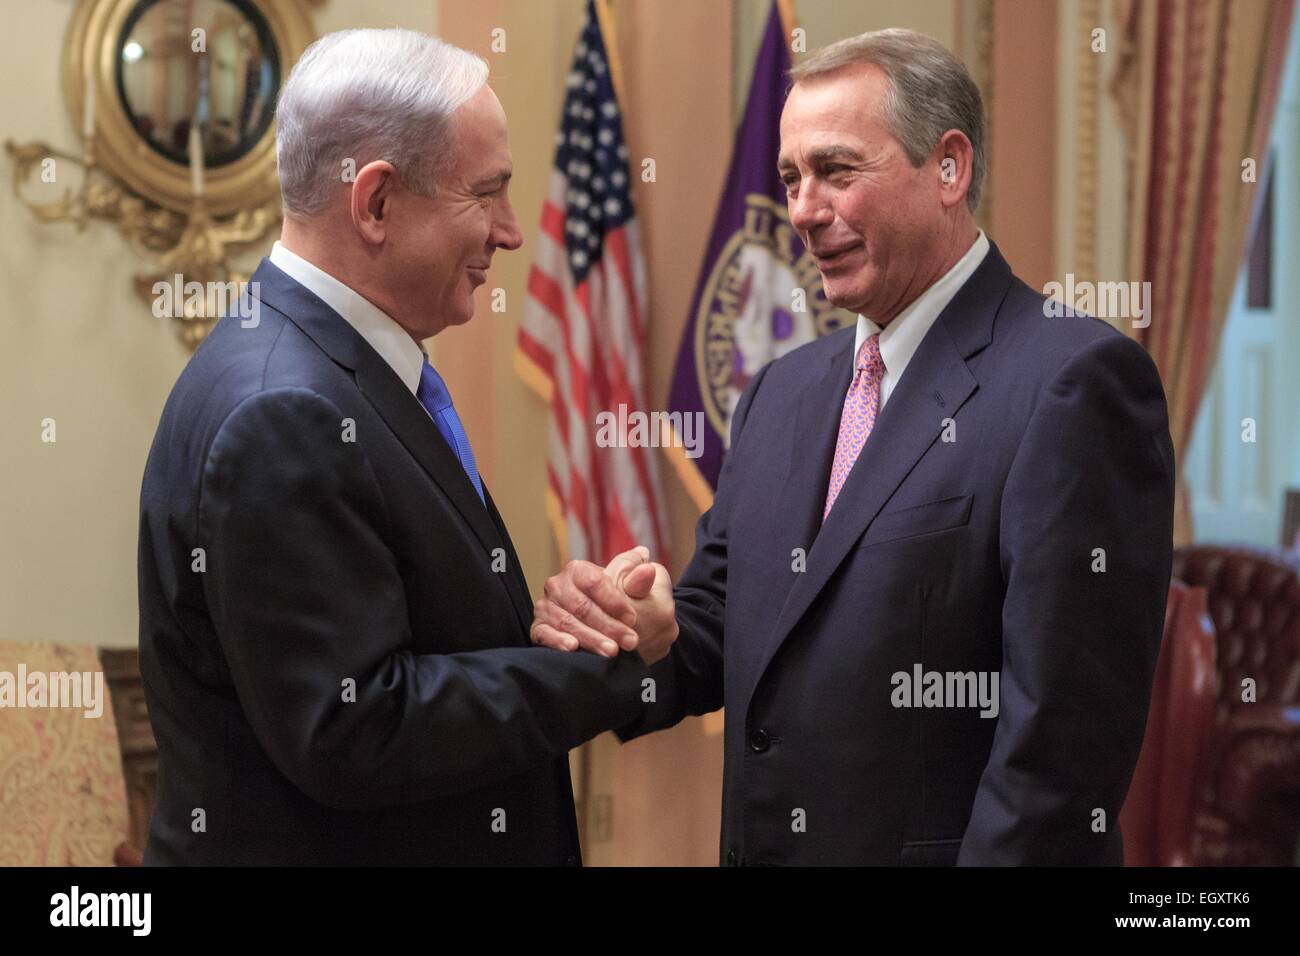 US Speaker of the House John Boehner welcomes Israeli Prime Minister Benjamin Netanyahu before his third addresses to a joint session of Congress March 3, 2015 in Washington, DC. Netanyahu was invited by the Republican majority against usual protocol and railed against a possible Iranian nuclear deal currently being negotiated by U.S. Secretary of State John Kerry. Stock Photo